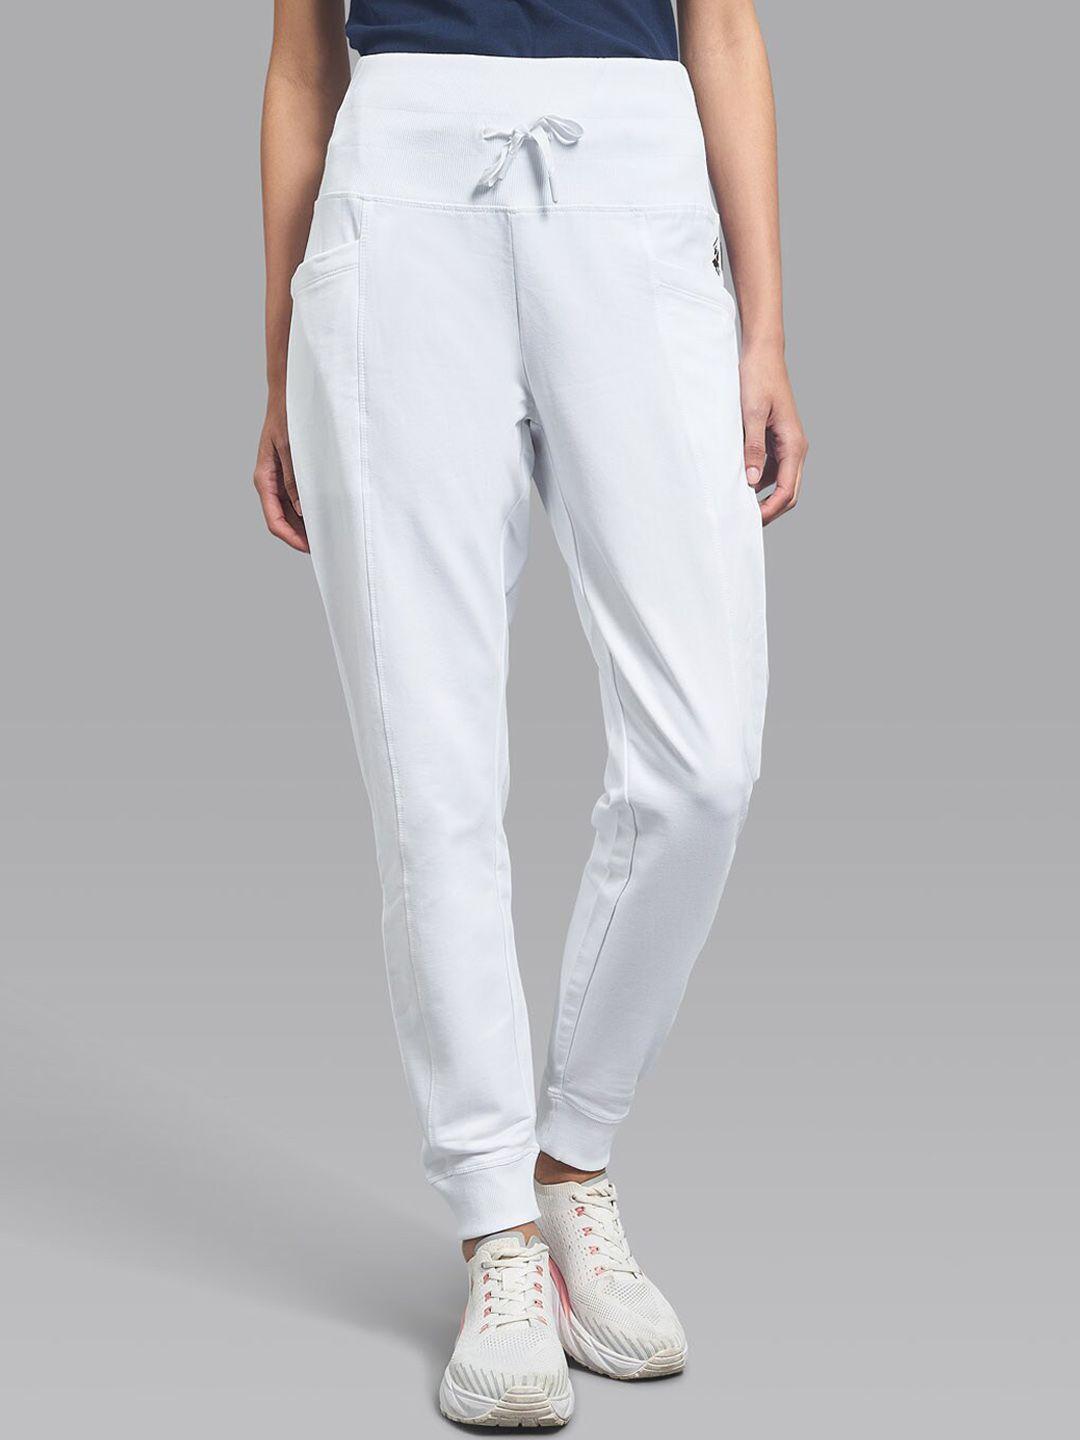 beverly hills polo club women white solid cotton joggers